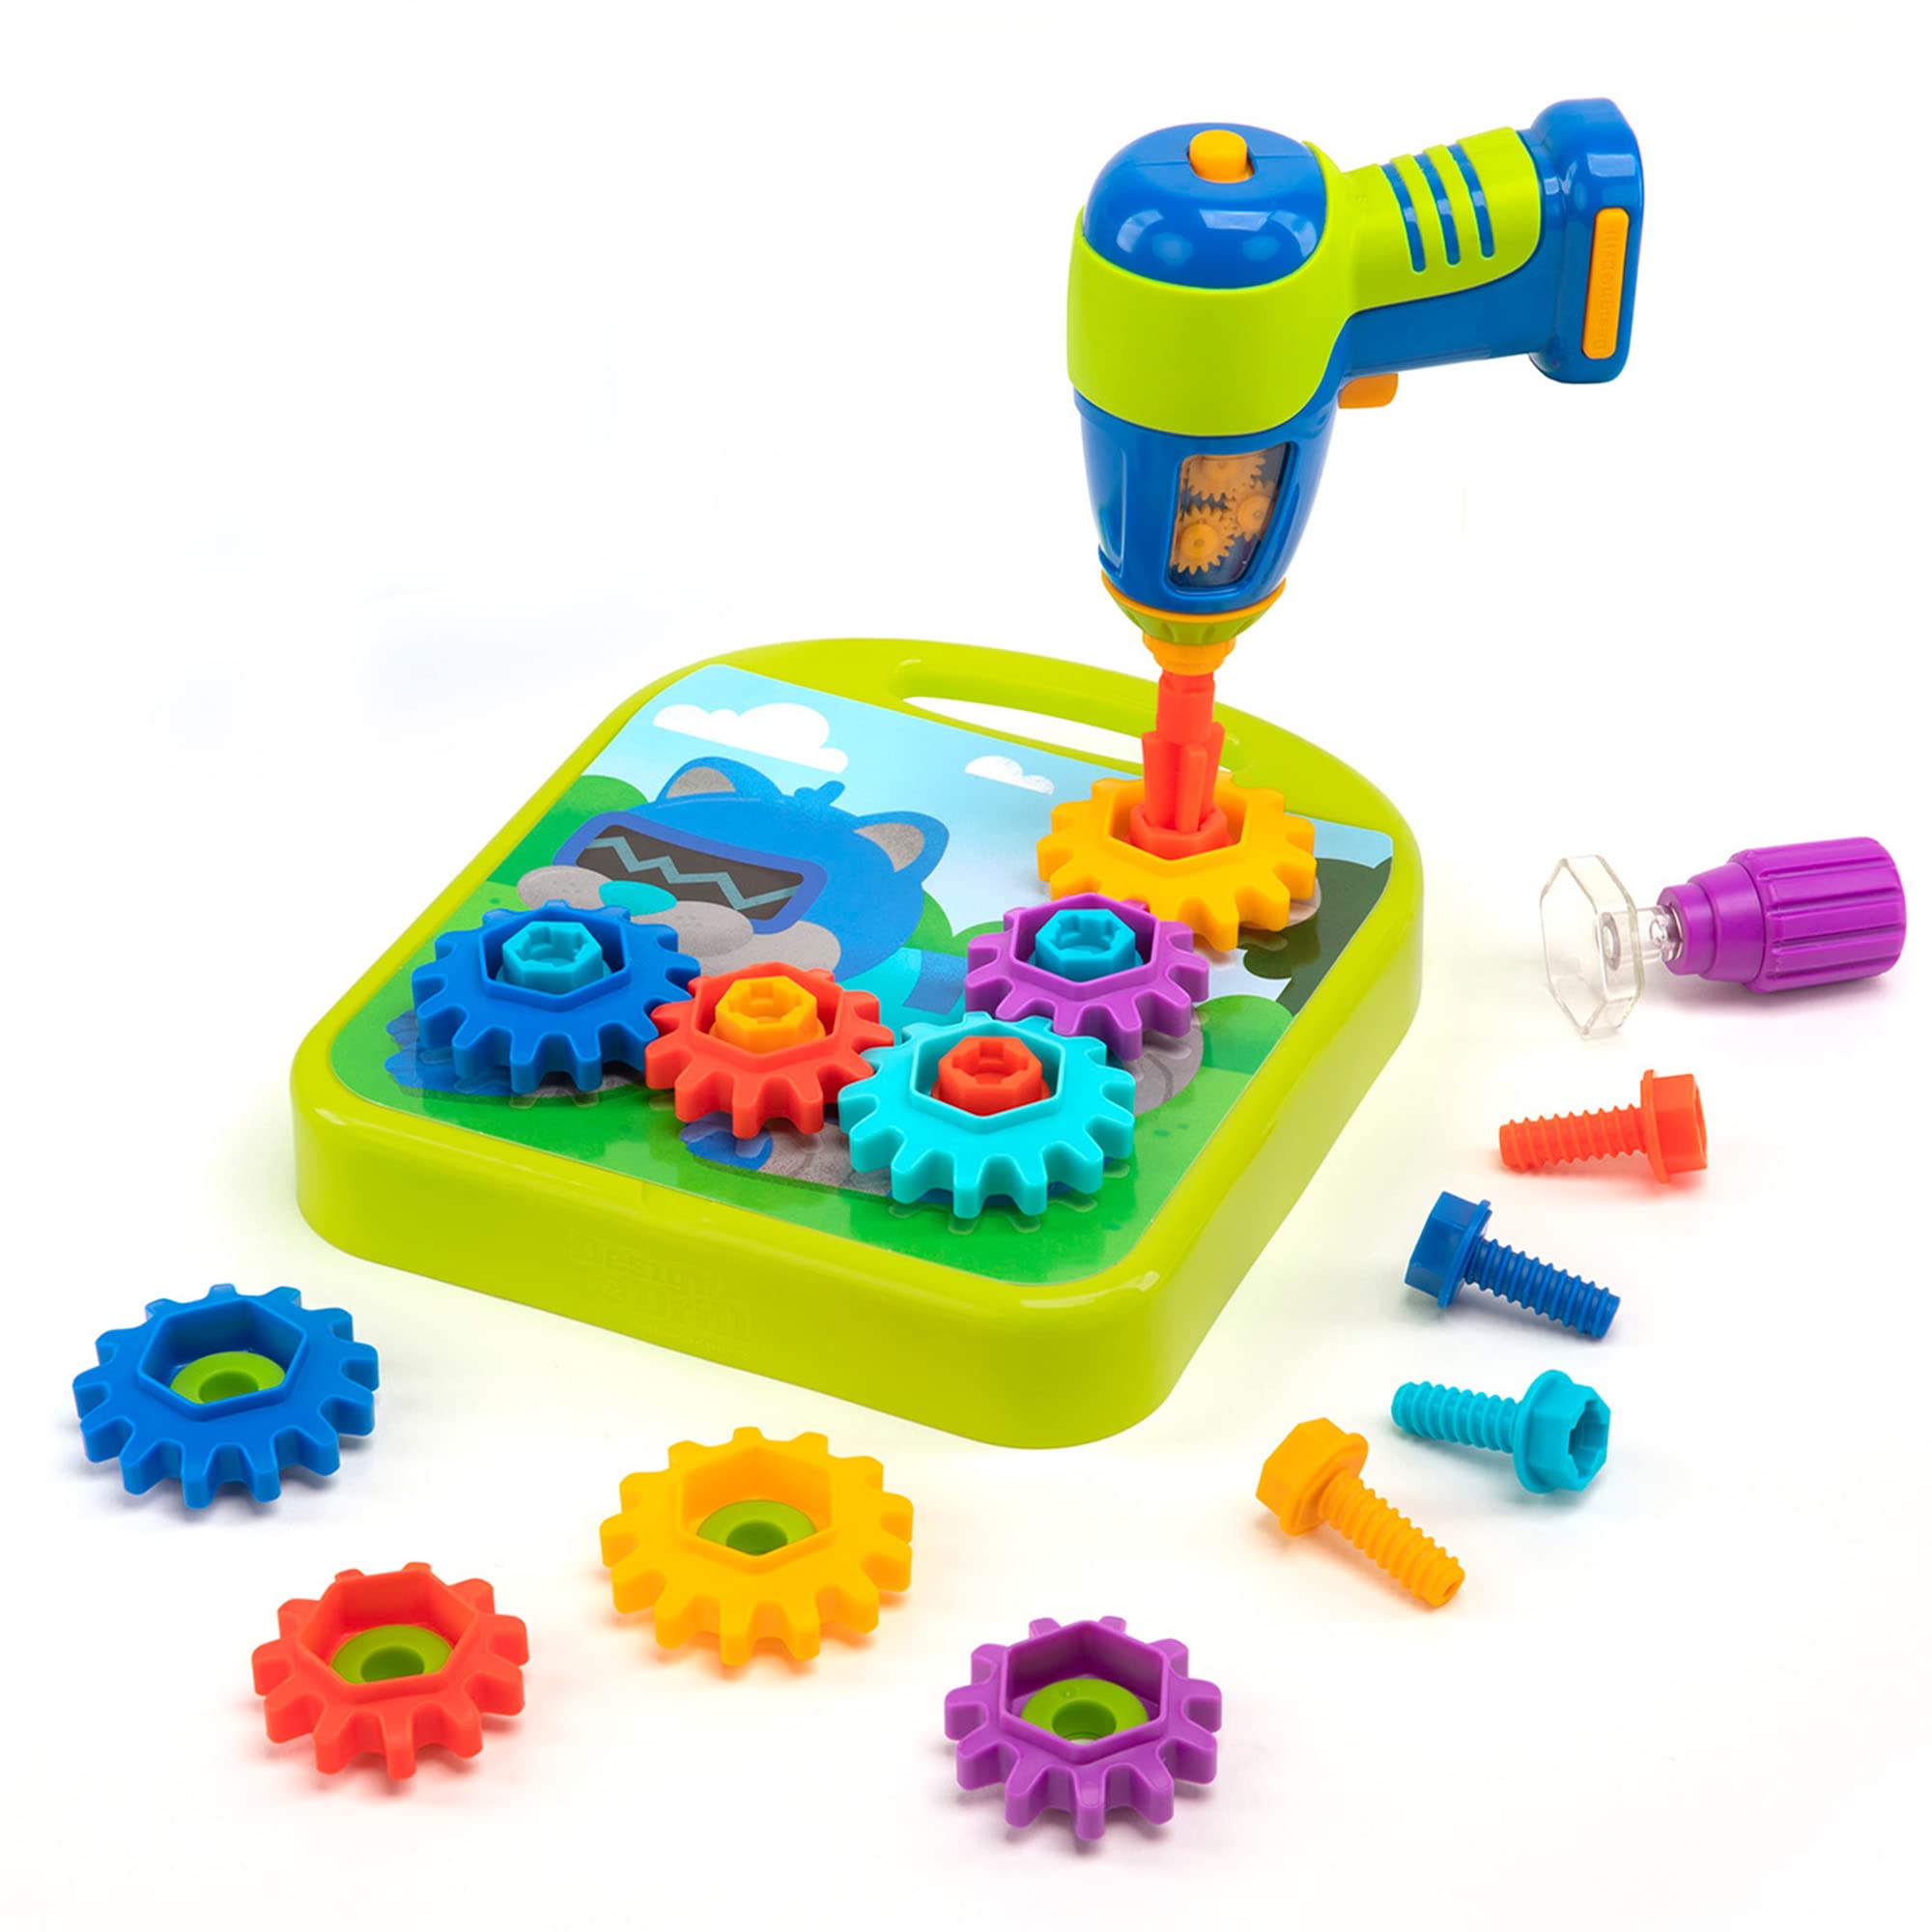 55-Piece Educational Insights Design & Drill Gears Workshop w/ Electric Toy Drill $16 + Free Shipping w/ Walmart+ or on $35+